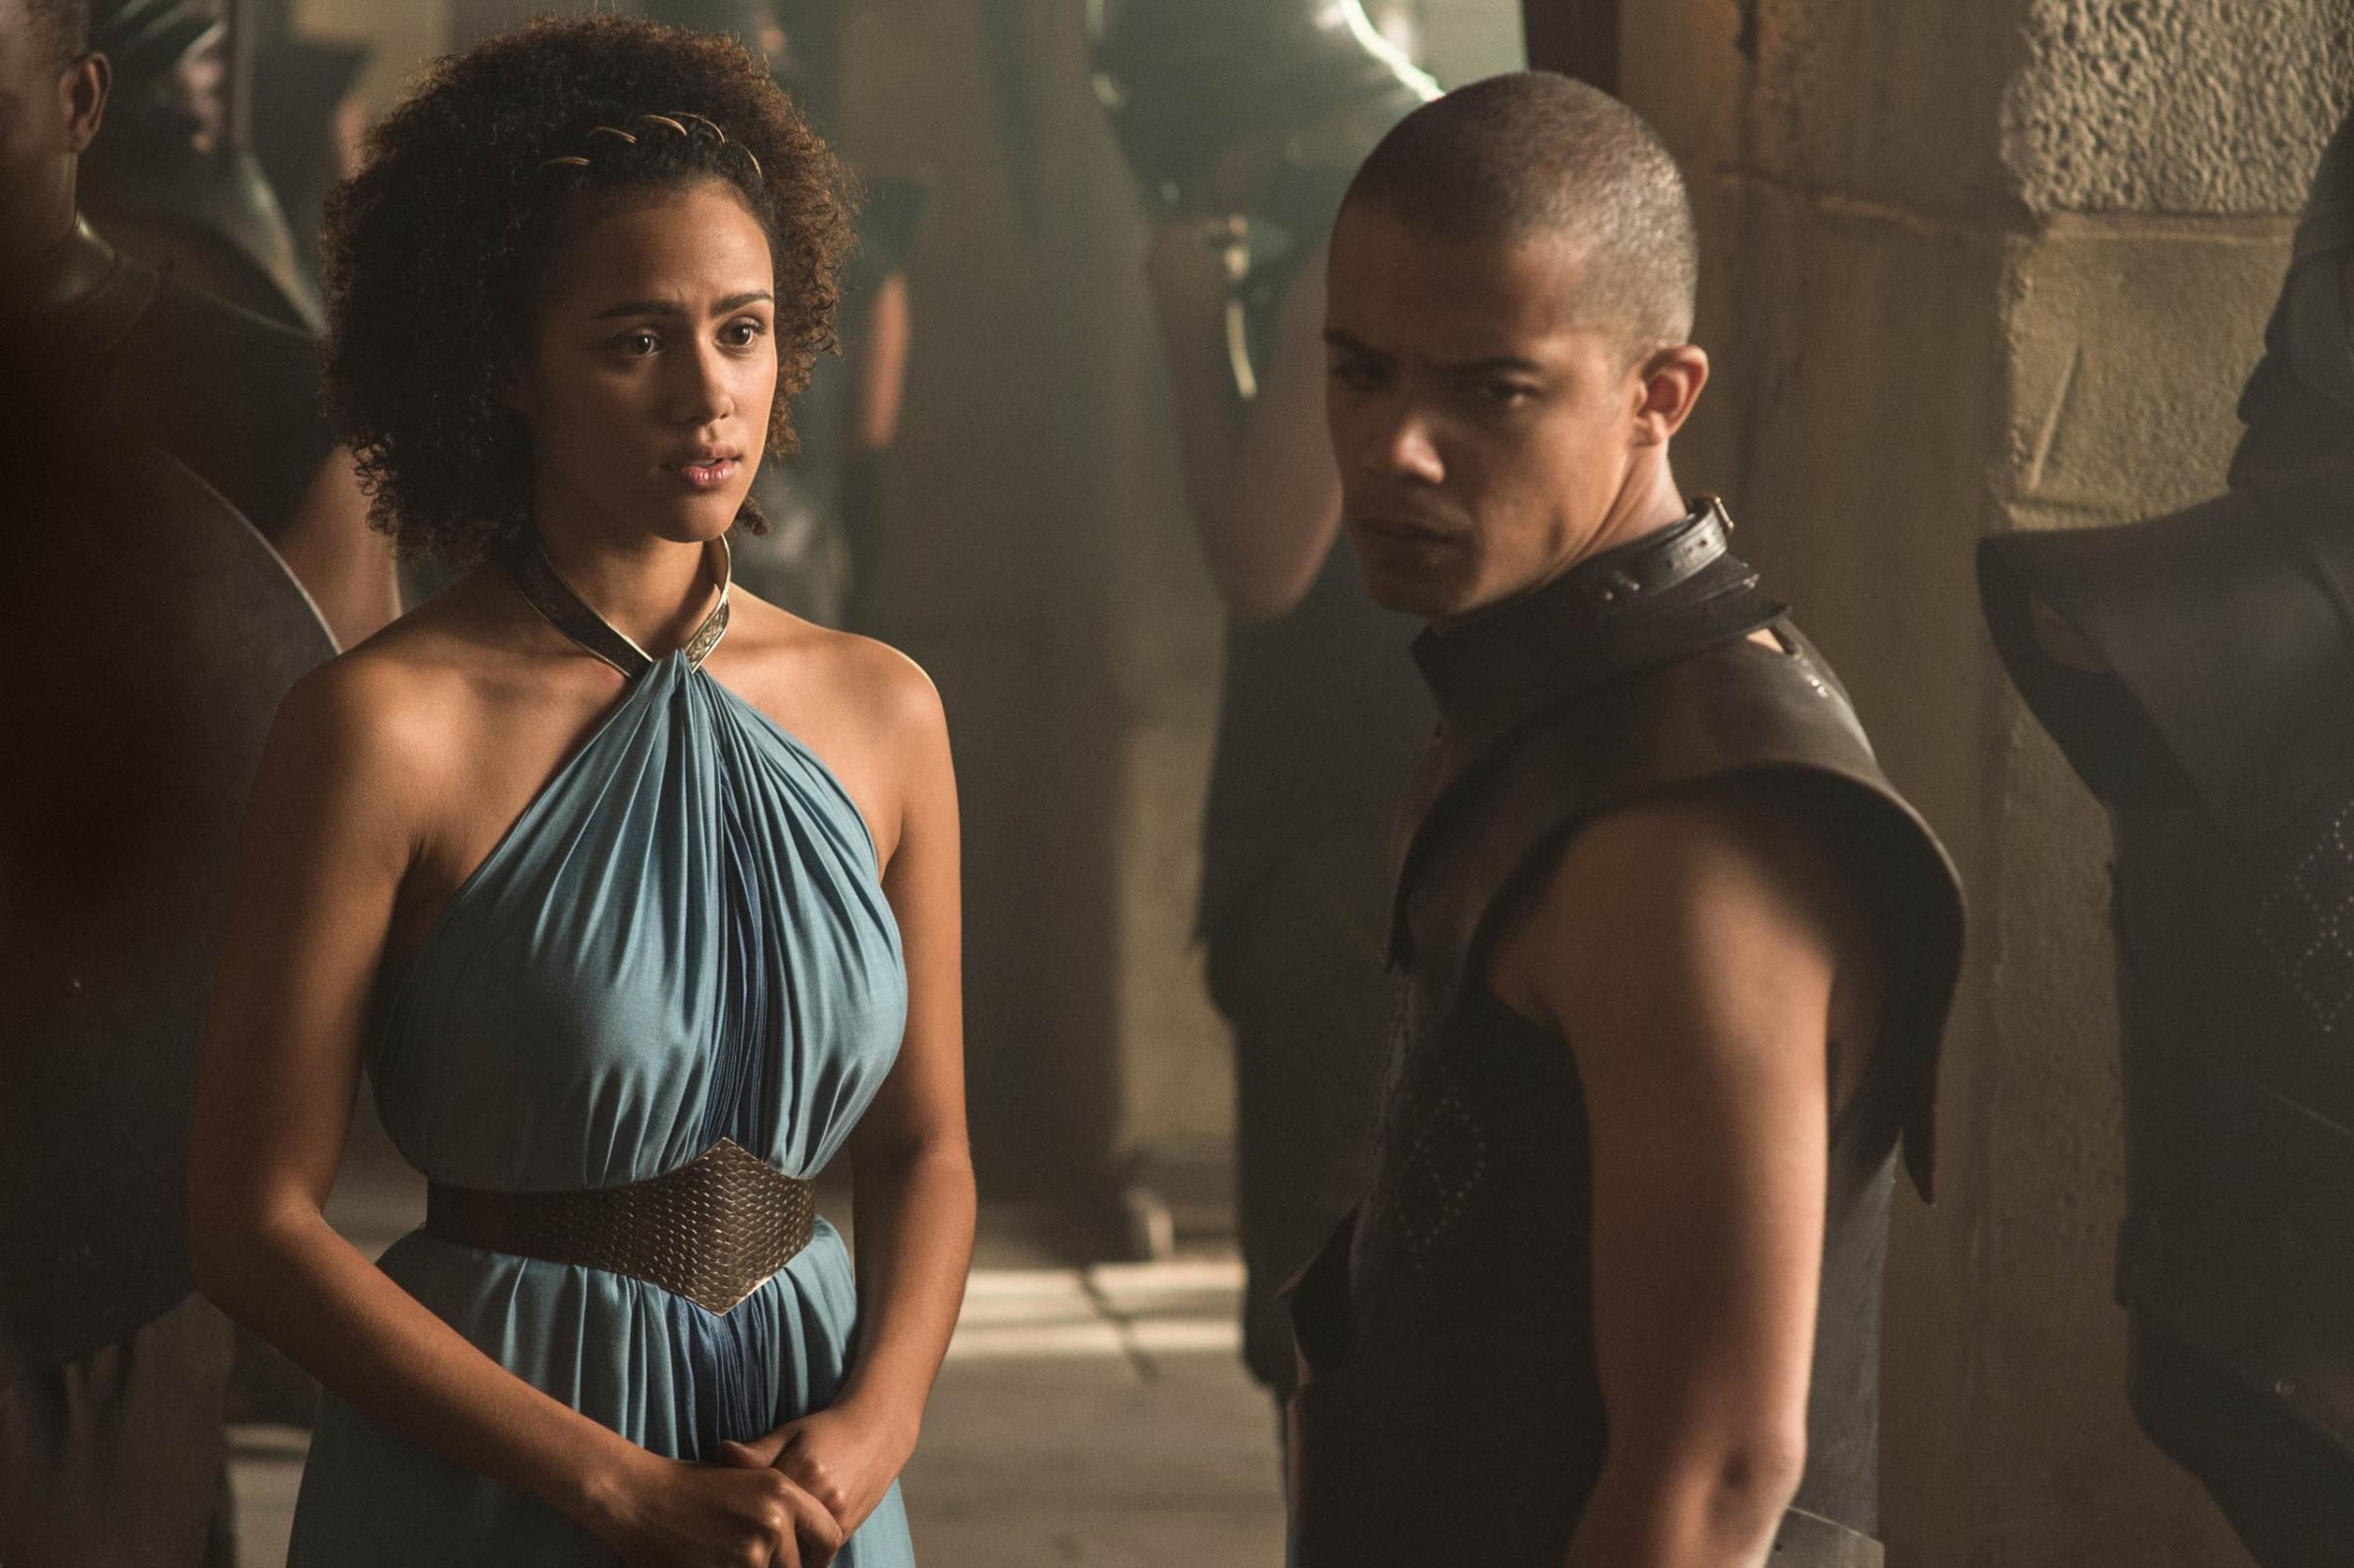 Jacob Anderson stars as Grey Worm in Game of Thrones